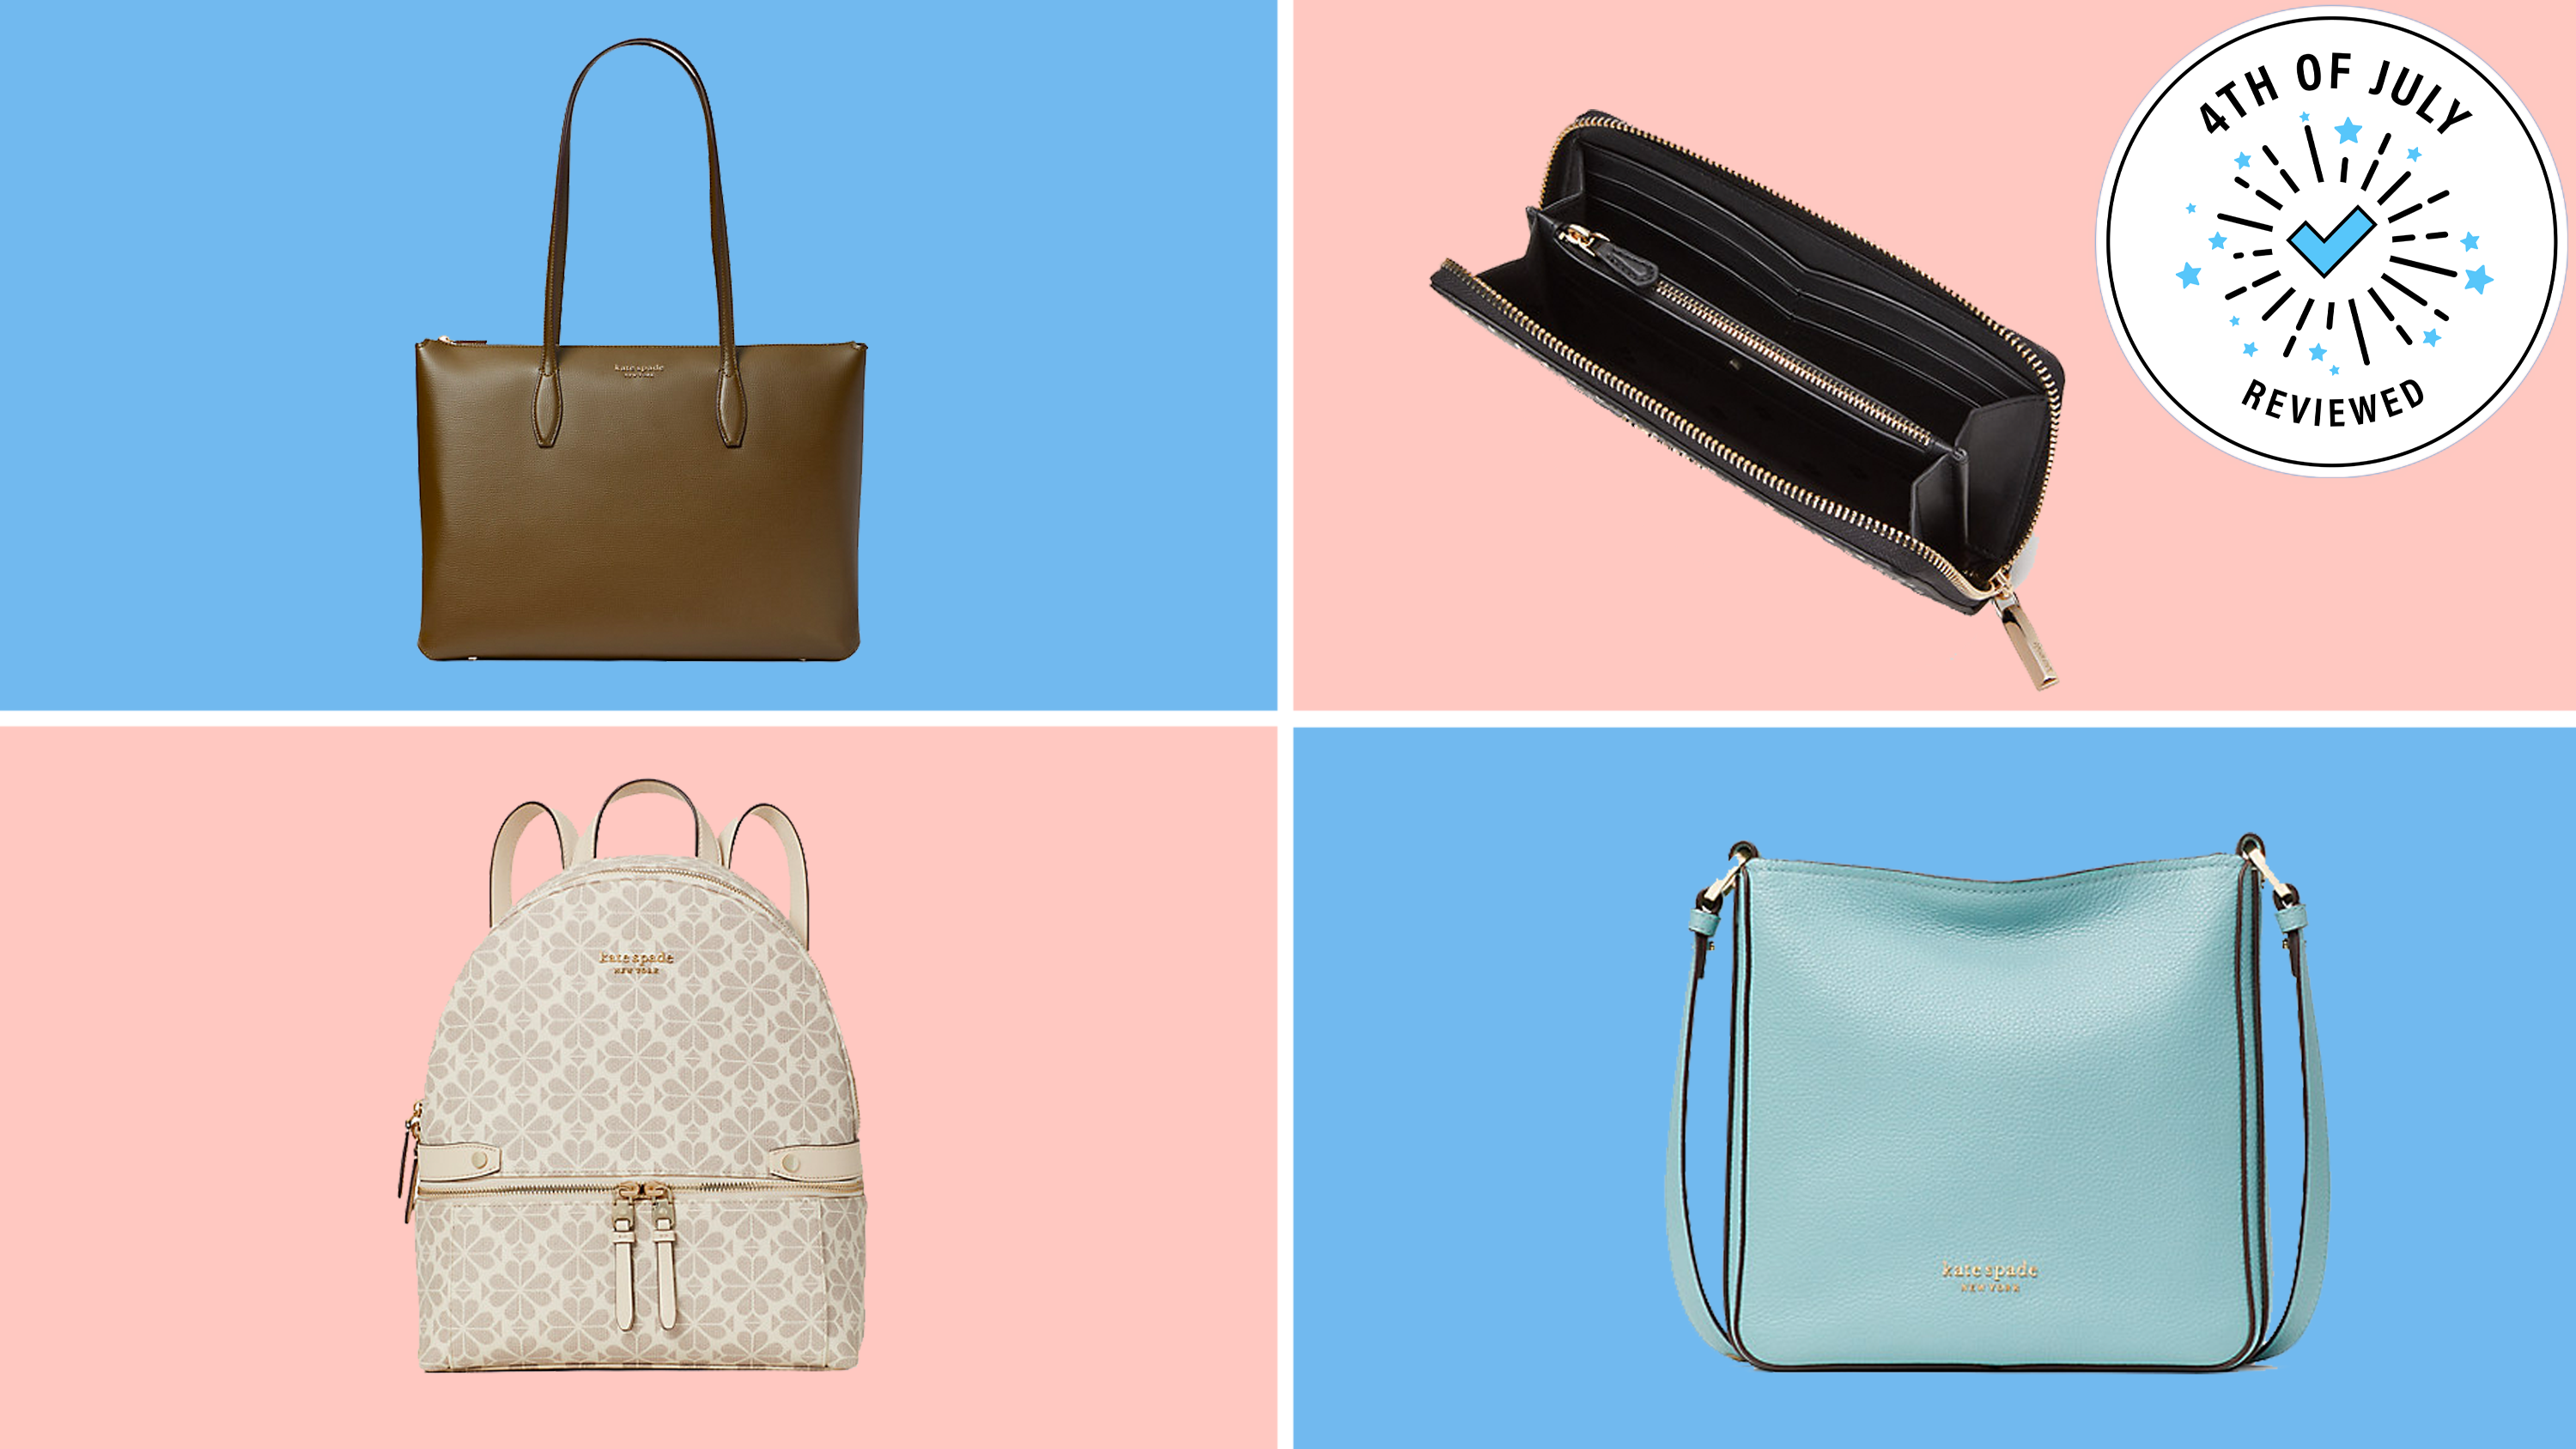 4th of July sale: Save 40% on Kate Spade purses